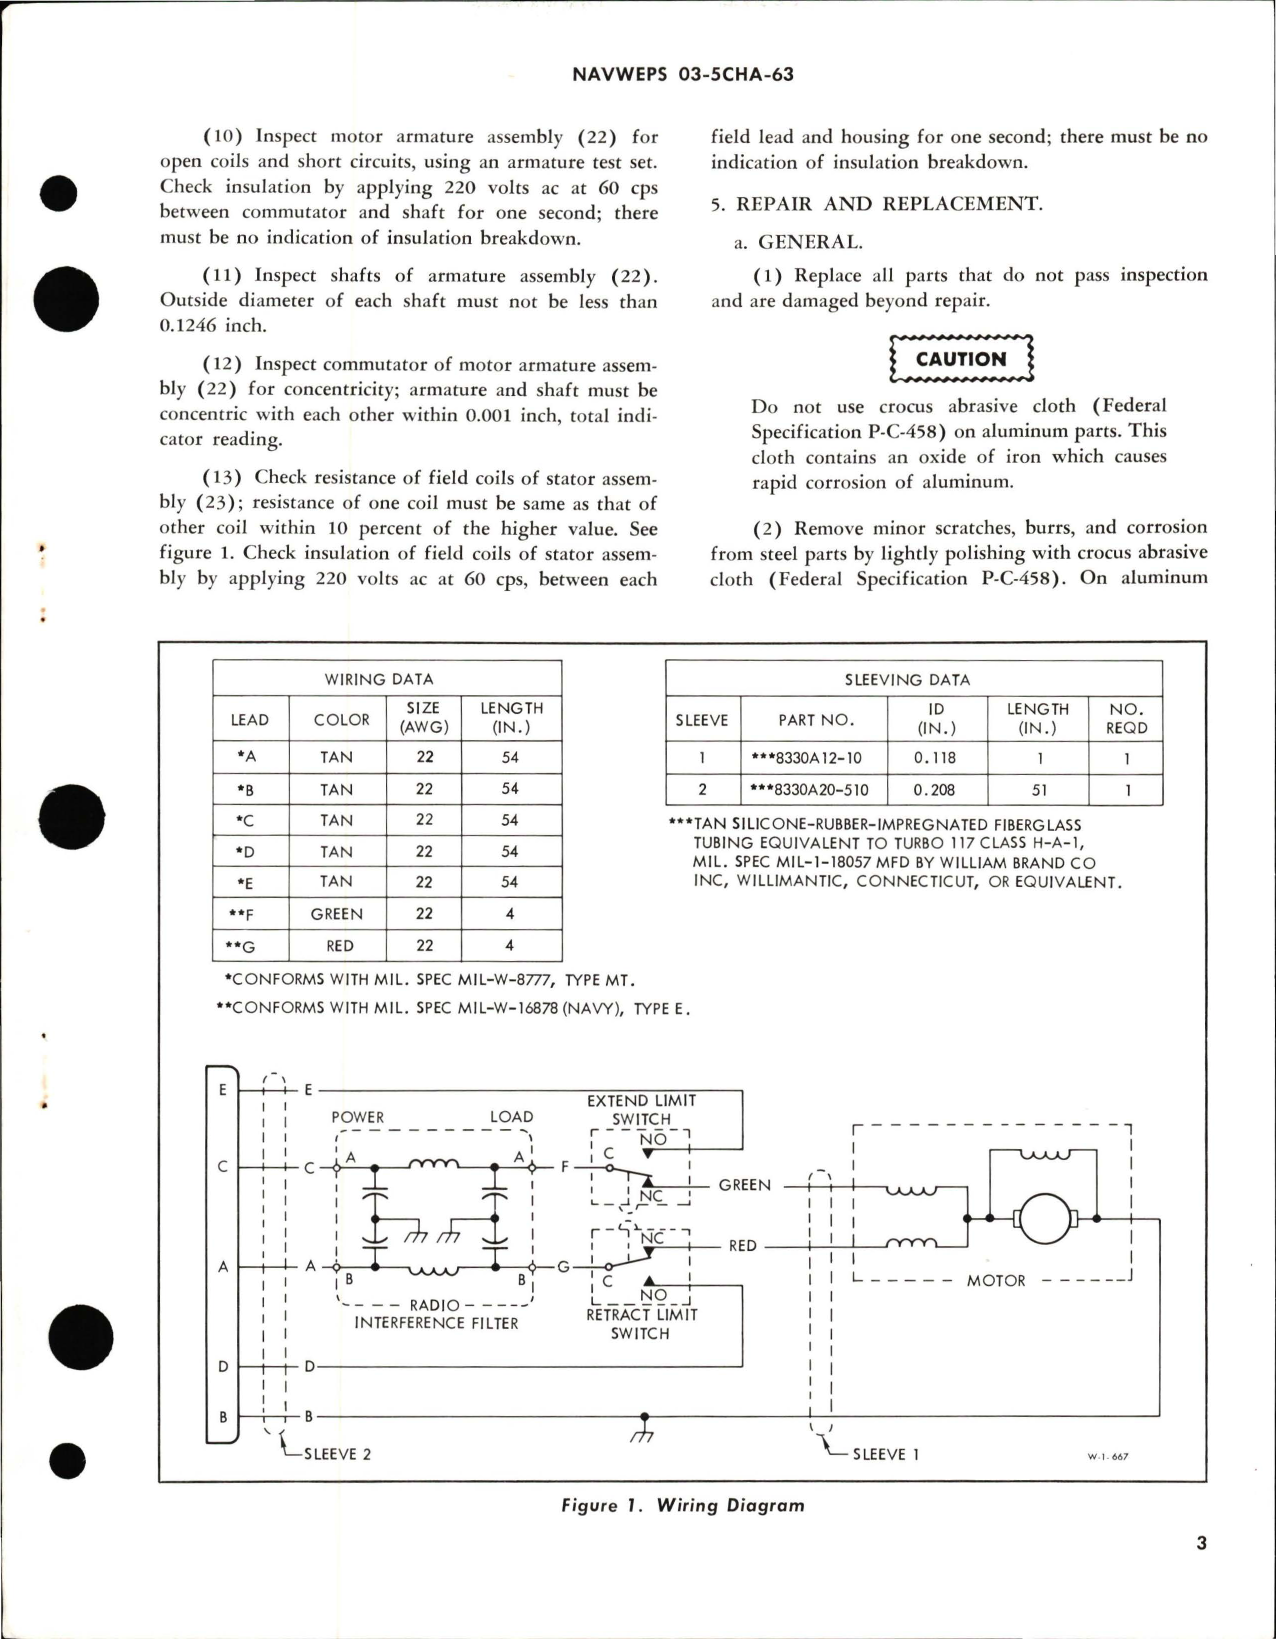 Sample page 5 from AirCorps Library document: Overhaul Instructions with Parts Breakdown for Linear Electromechanical Actuator and Aircraft Direct Current Motor 